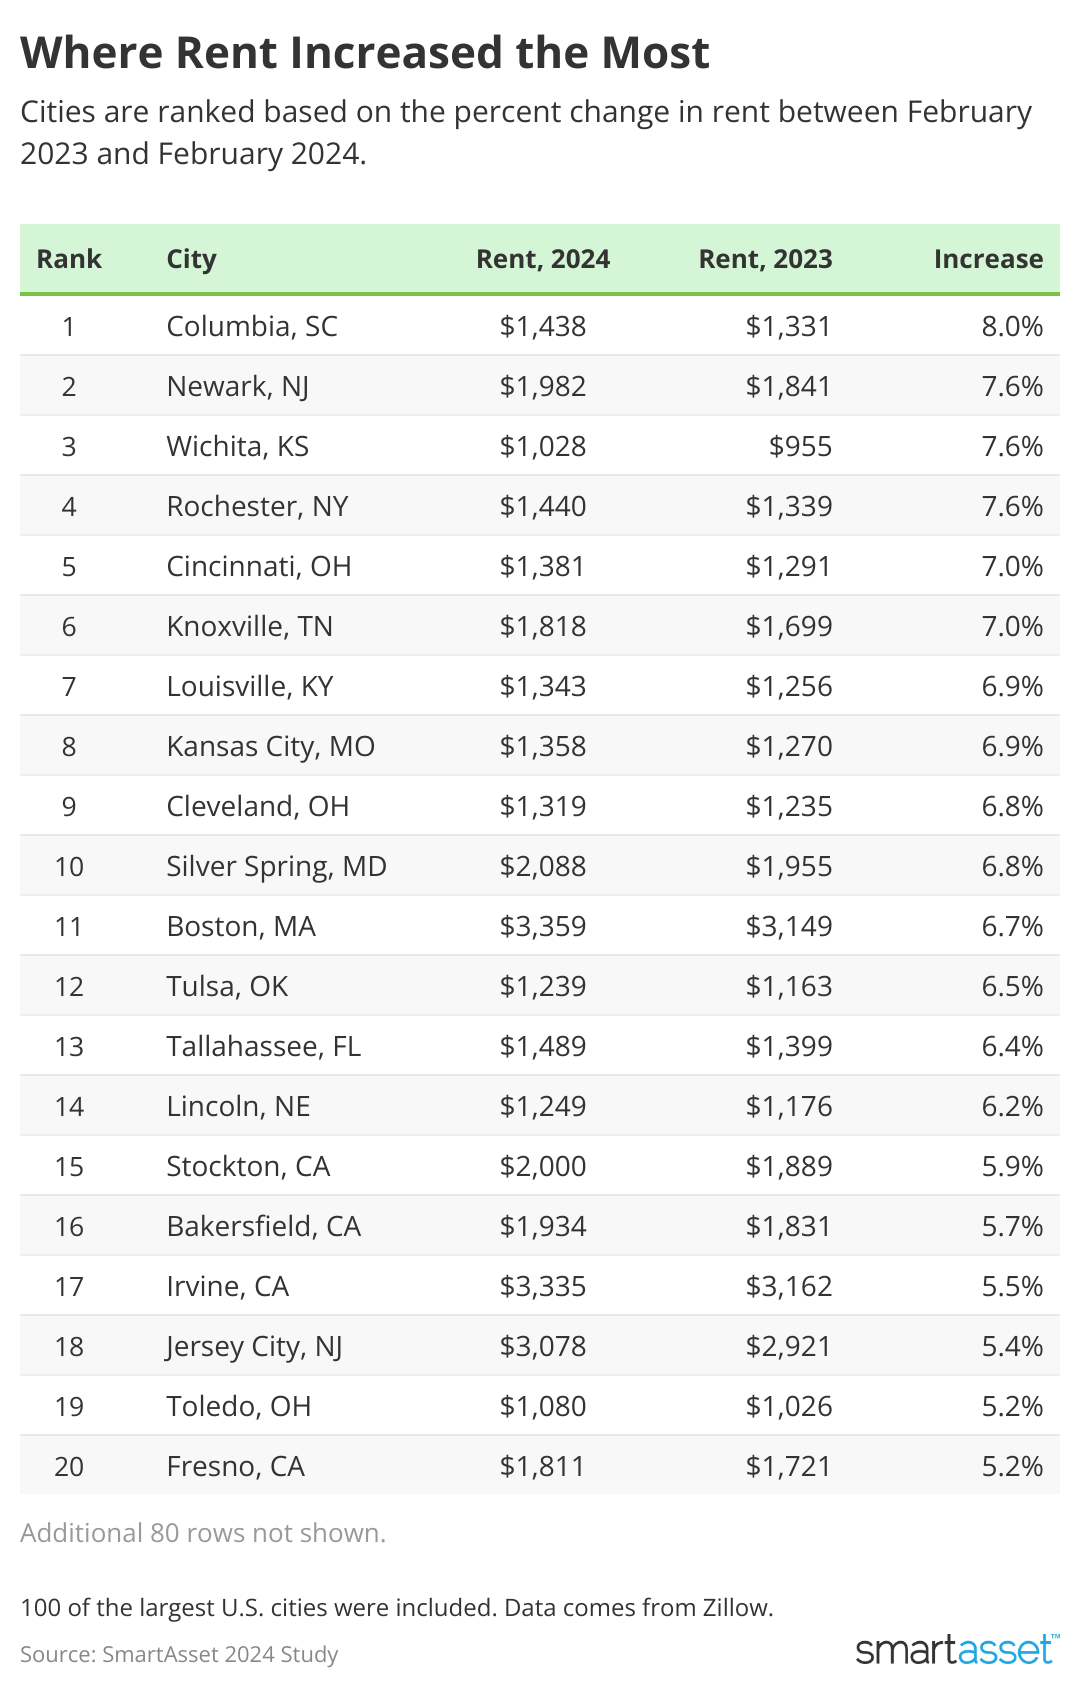 Table showing top 20 cities where rent increased the most